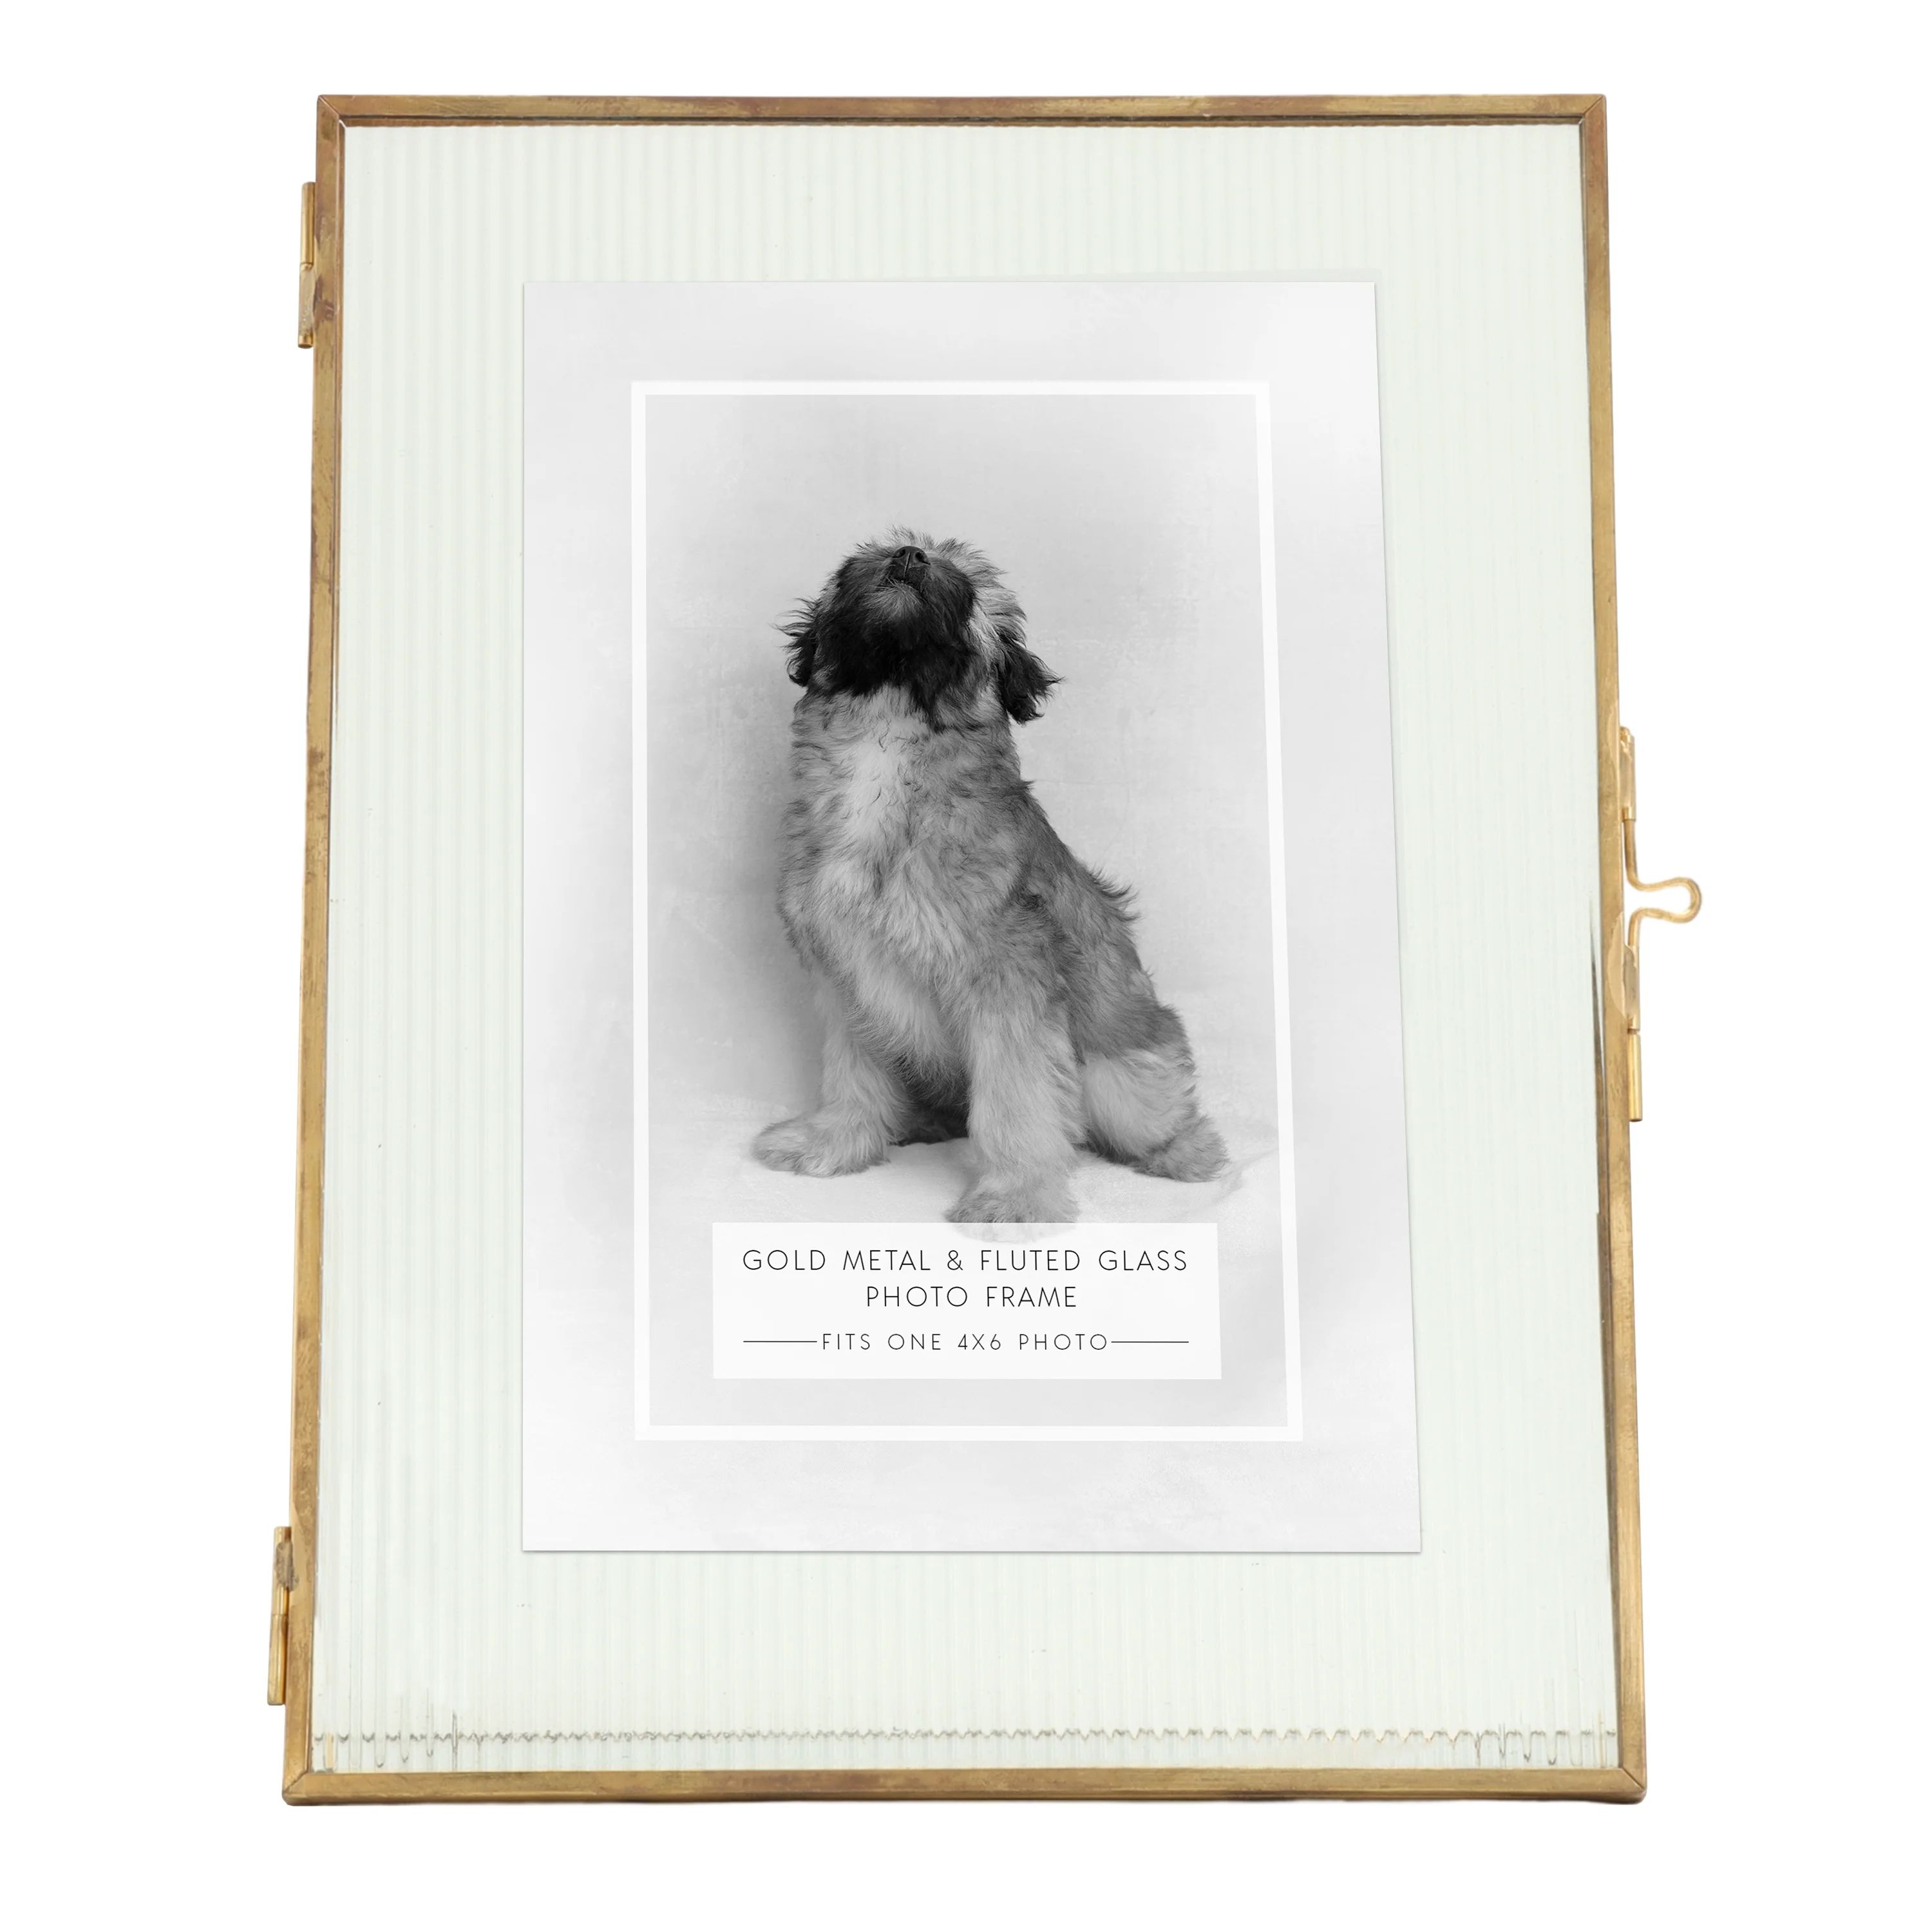 Brass Trimmed Fluted Glass Tabletop Picture Frame Fits up to a 5"x7" Photo | Walmart (US)